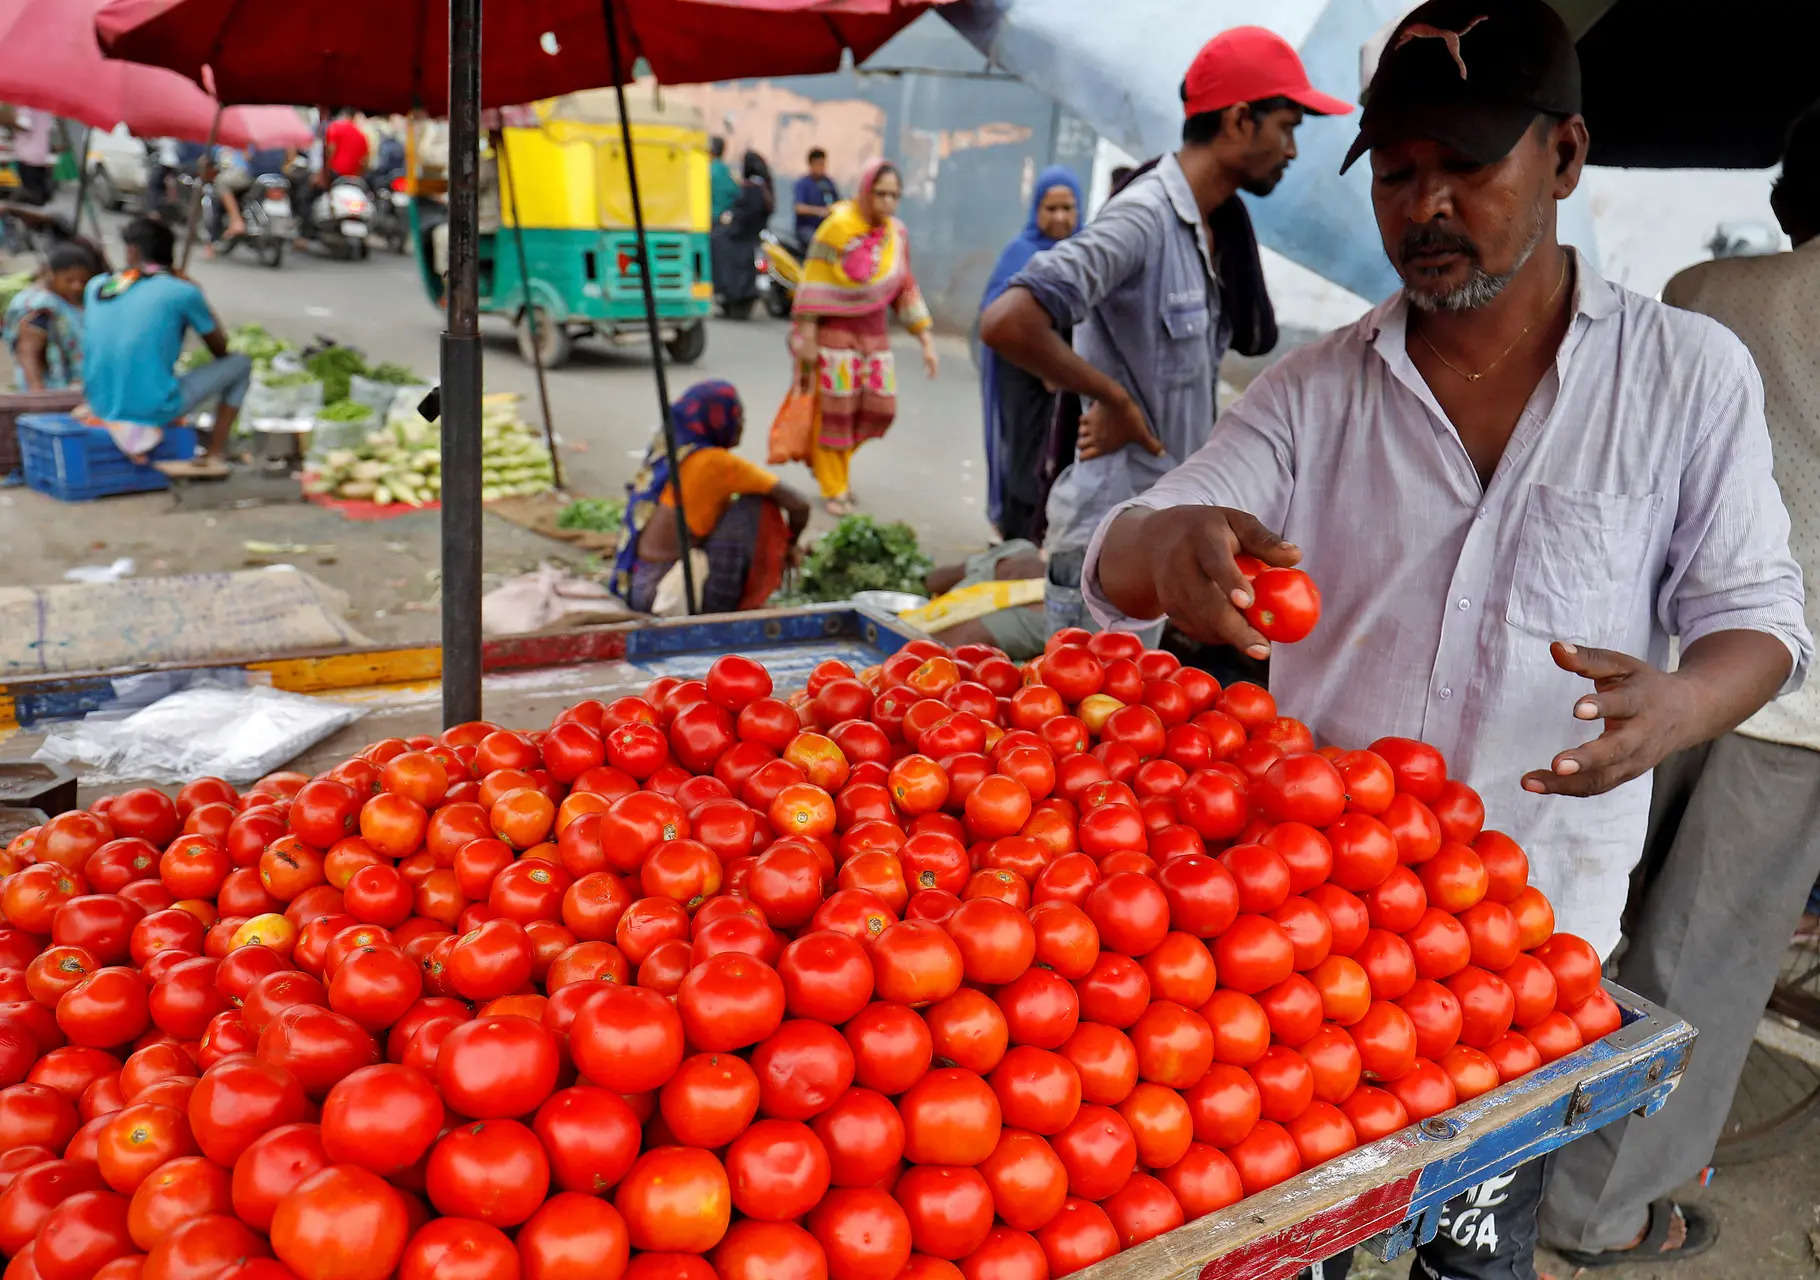 Tomato prices to normalize in 7-10 days, says Consumer Affairs minister Pralhad Joshi 